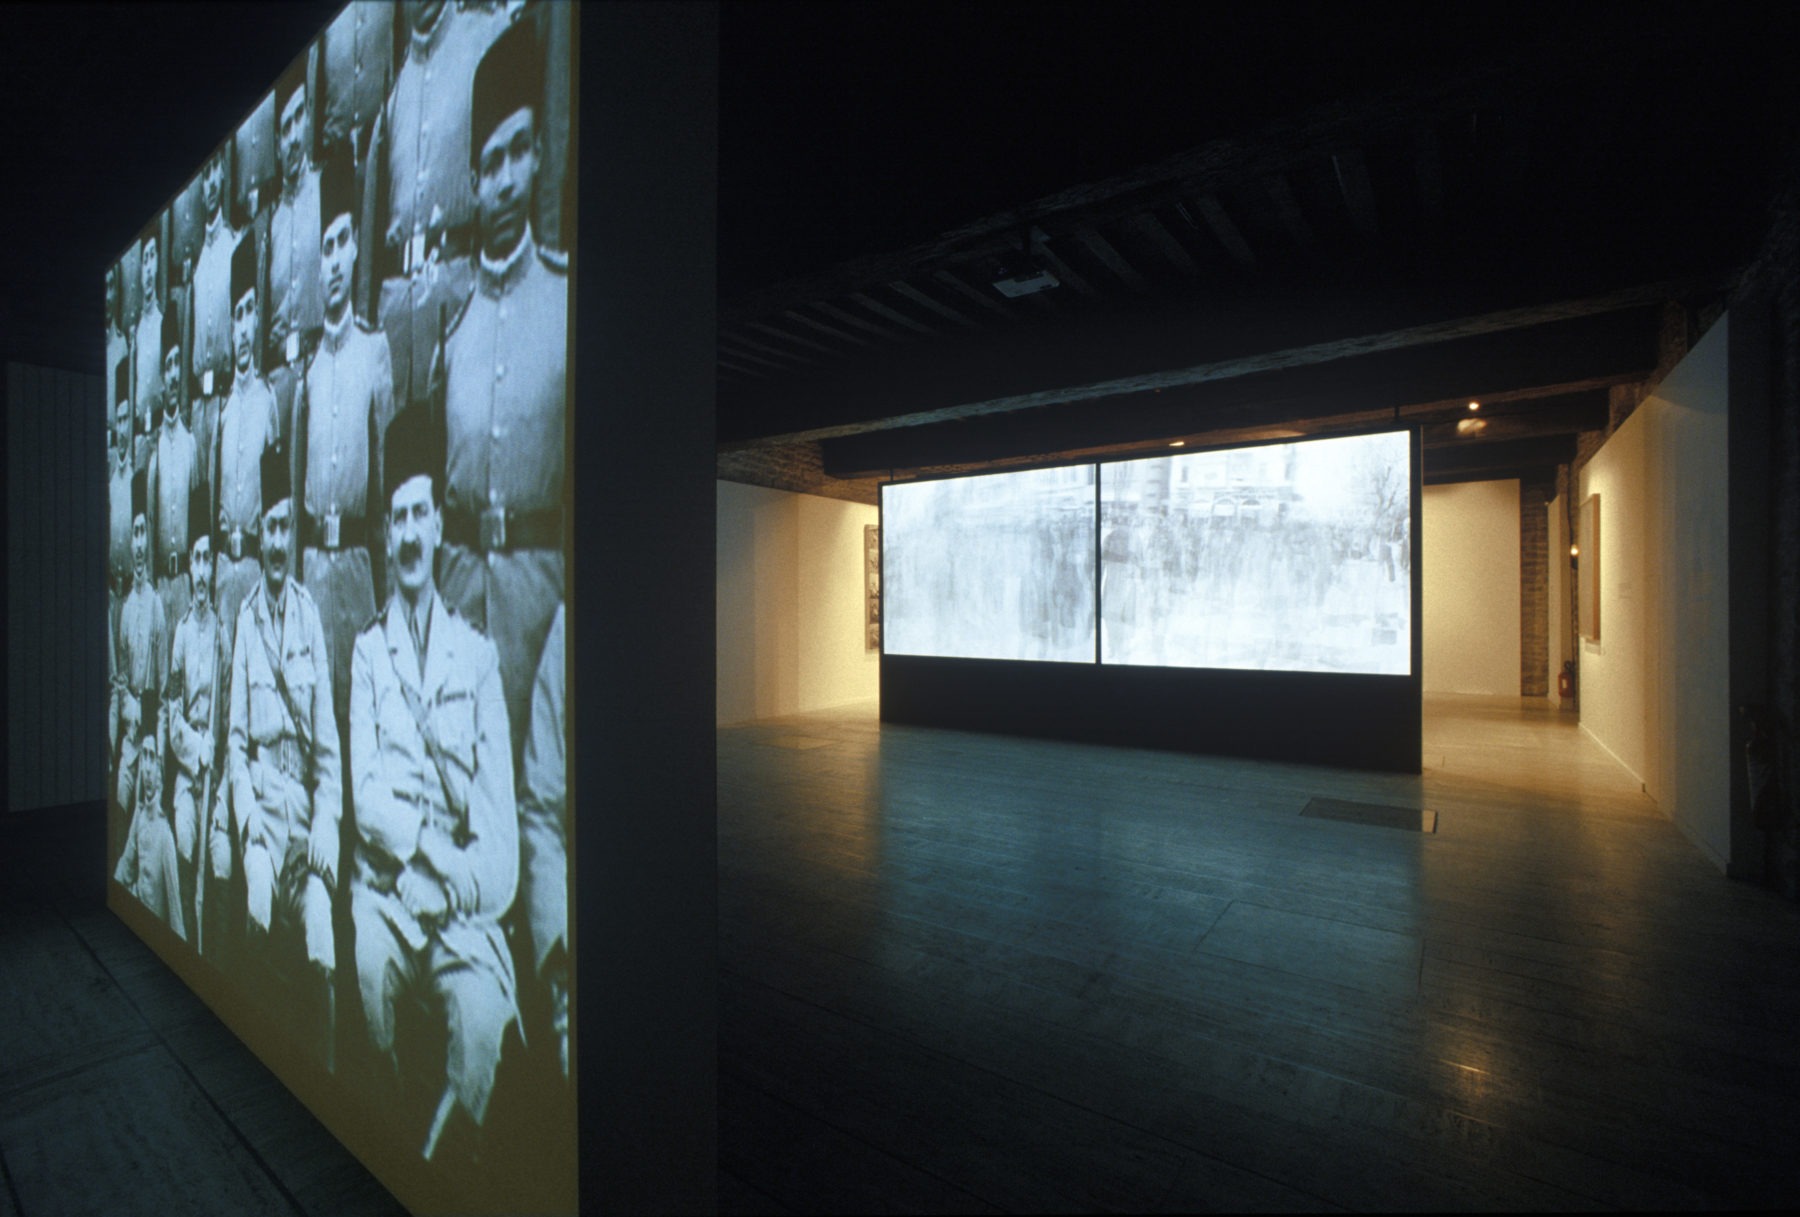 Walid Raad and Akram Zaatari, 'Mapping Sitting', 2002. Installation view at Musée Nicephore Niepce, 2004, courtesy of the artists and the Arab Image Foundation